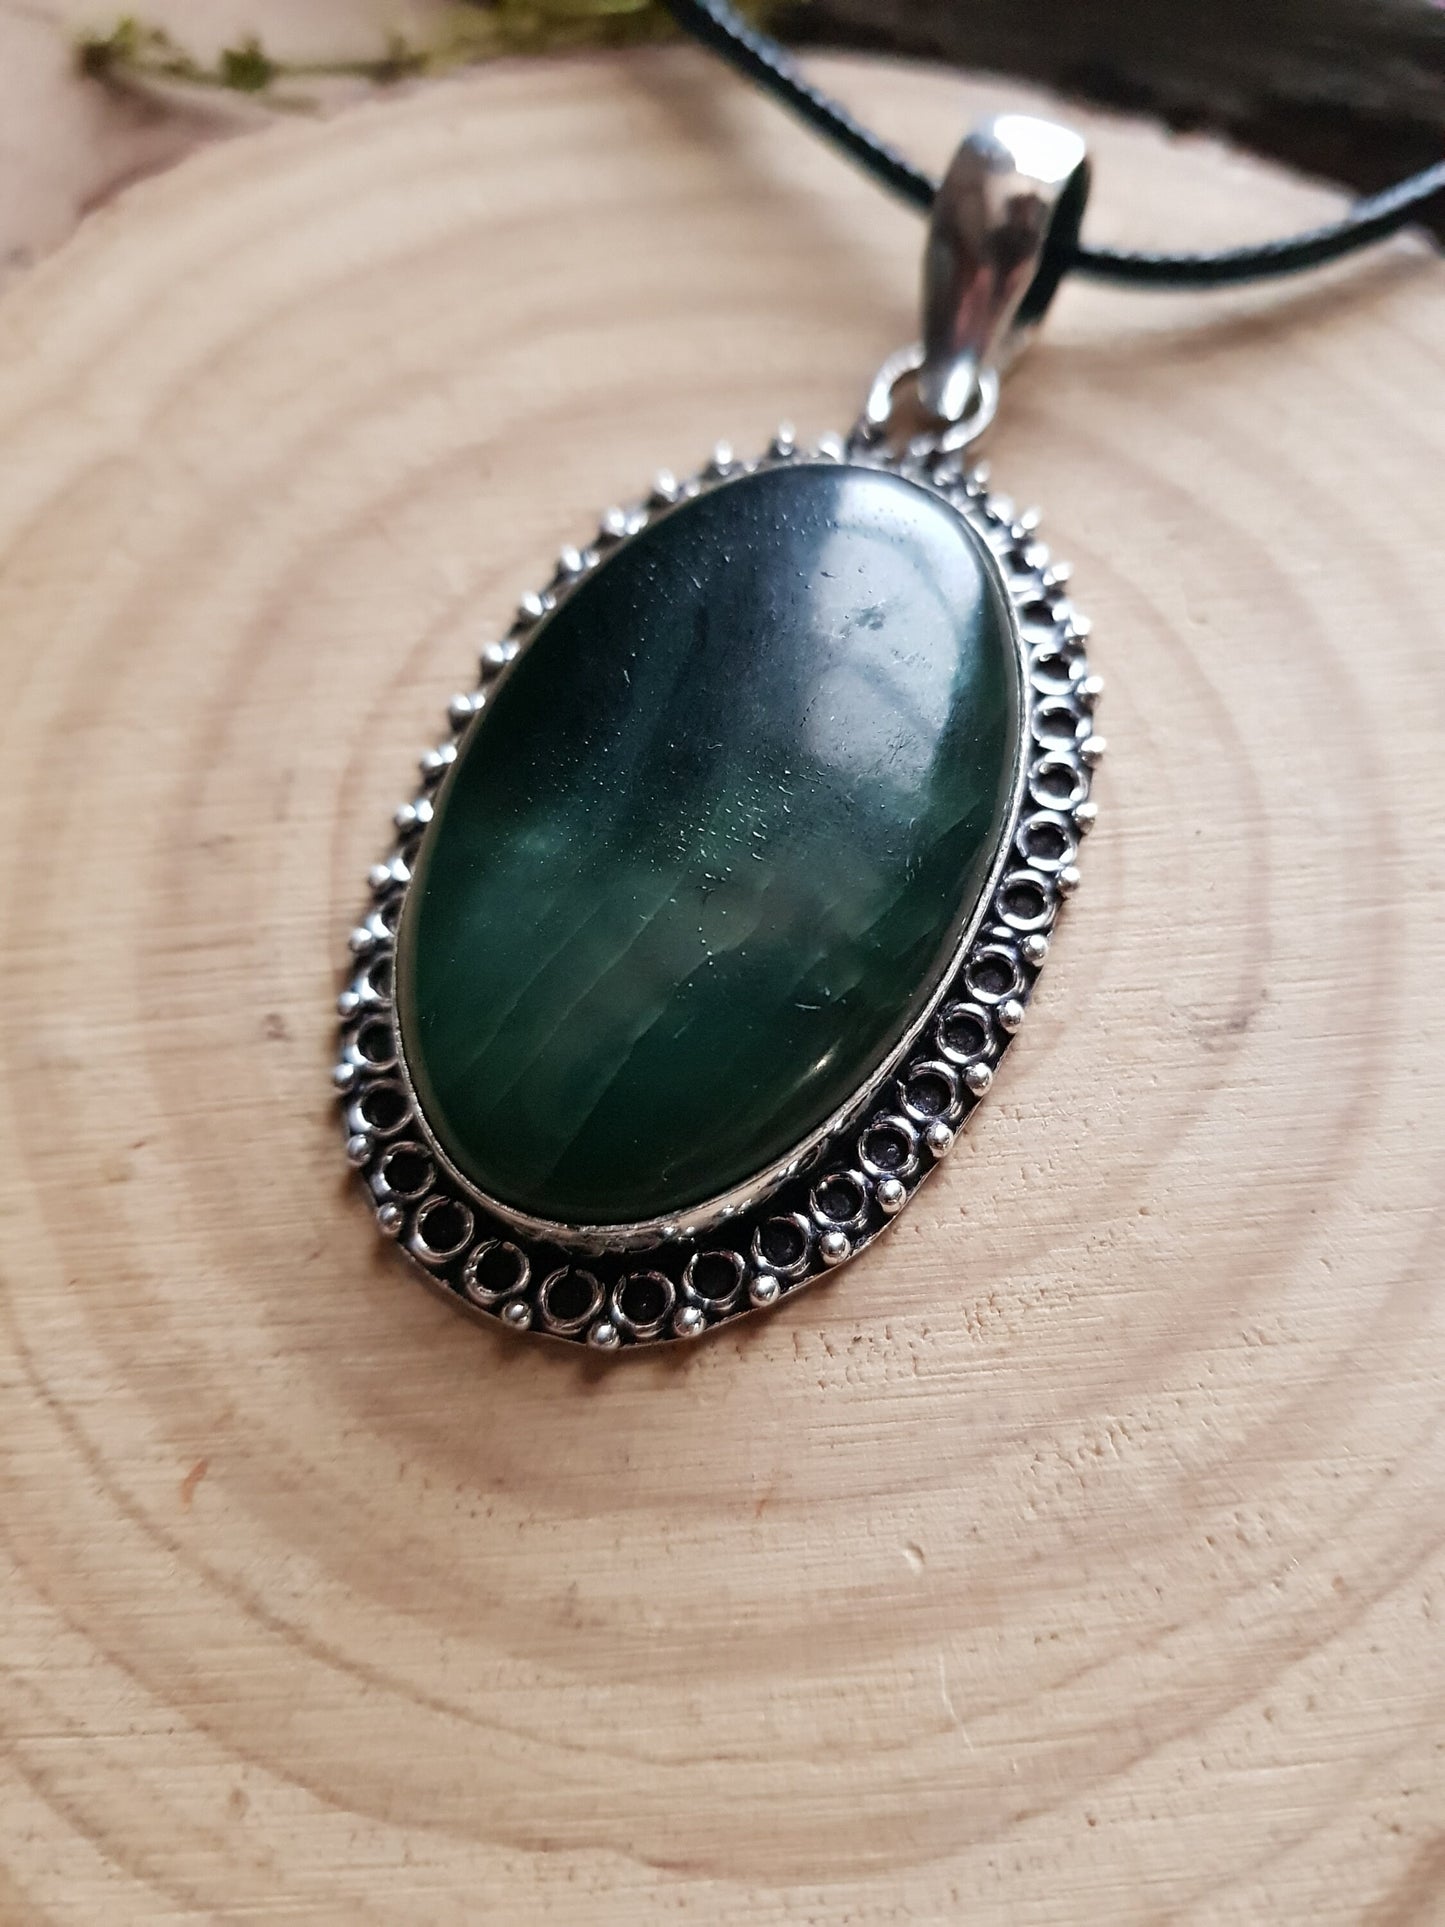 Nephrite Jade Pendant, Statement Necklace In Sterling Sivler, Crystal Necklace, Unisex Gift